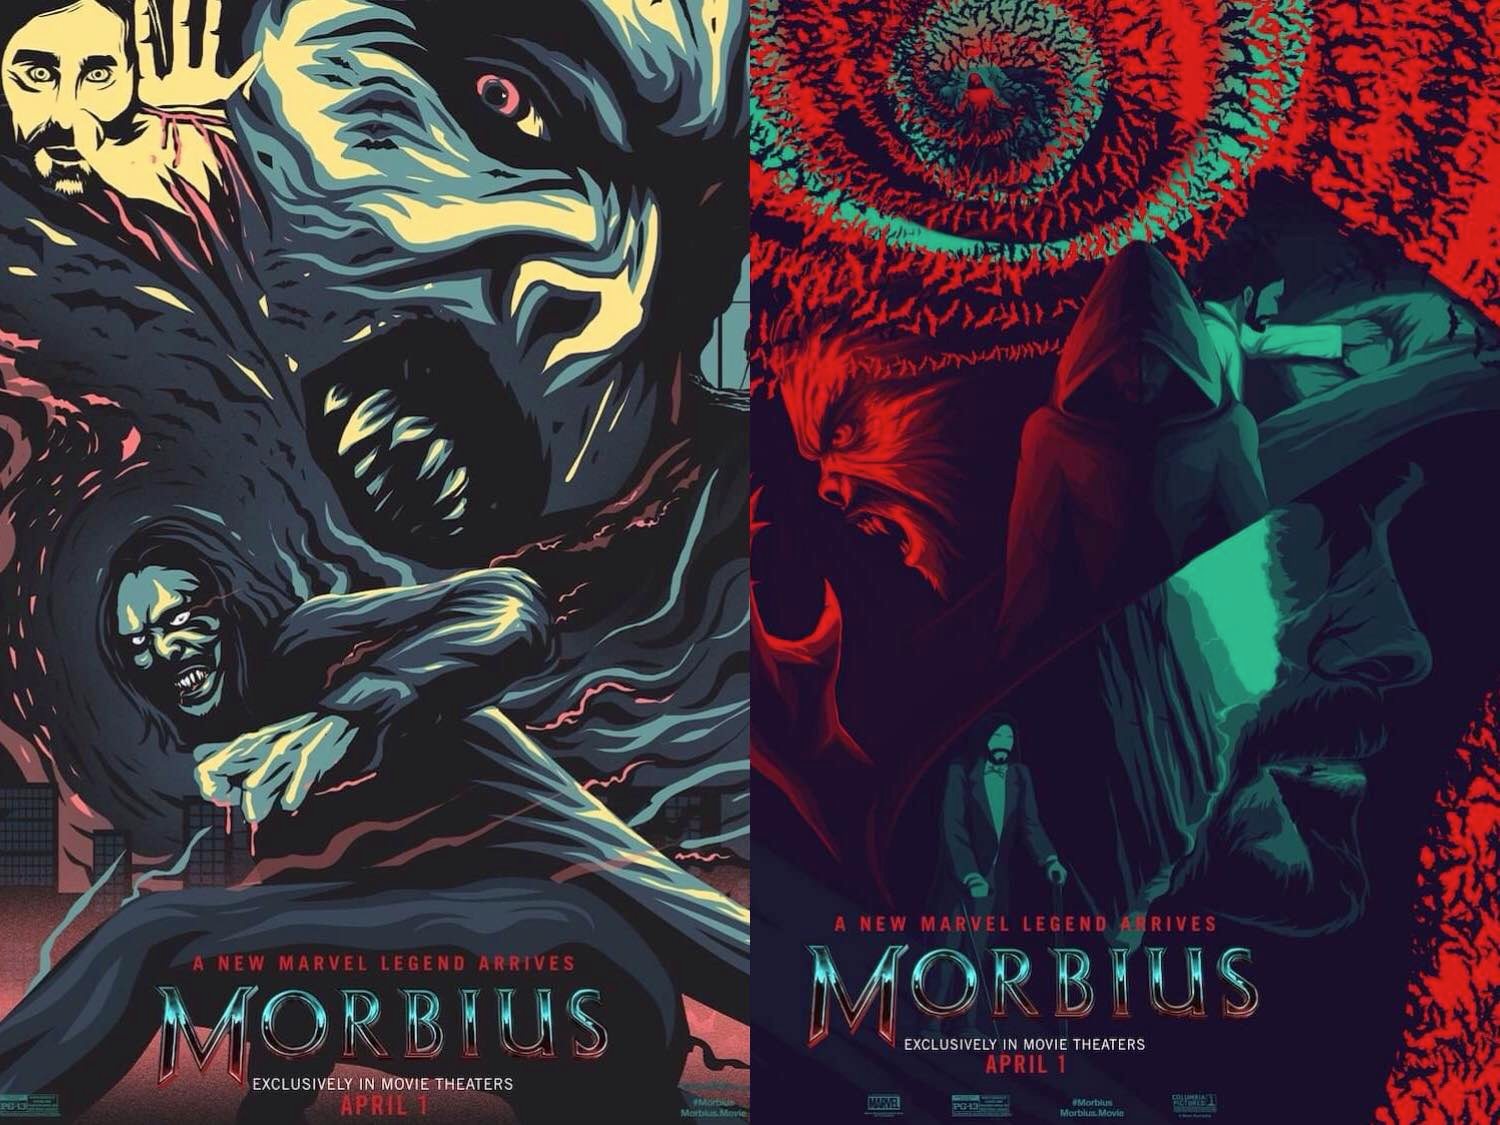 Two Filipino artists bag awards in ‘Morbius’ global fan art competition